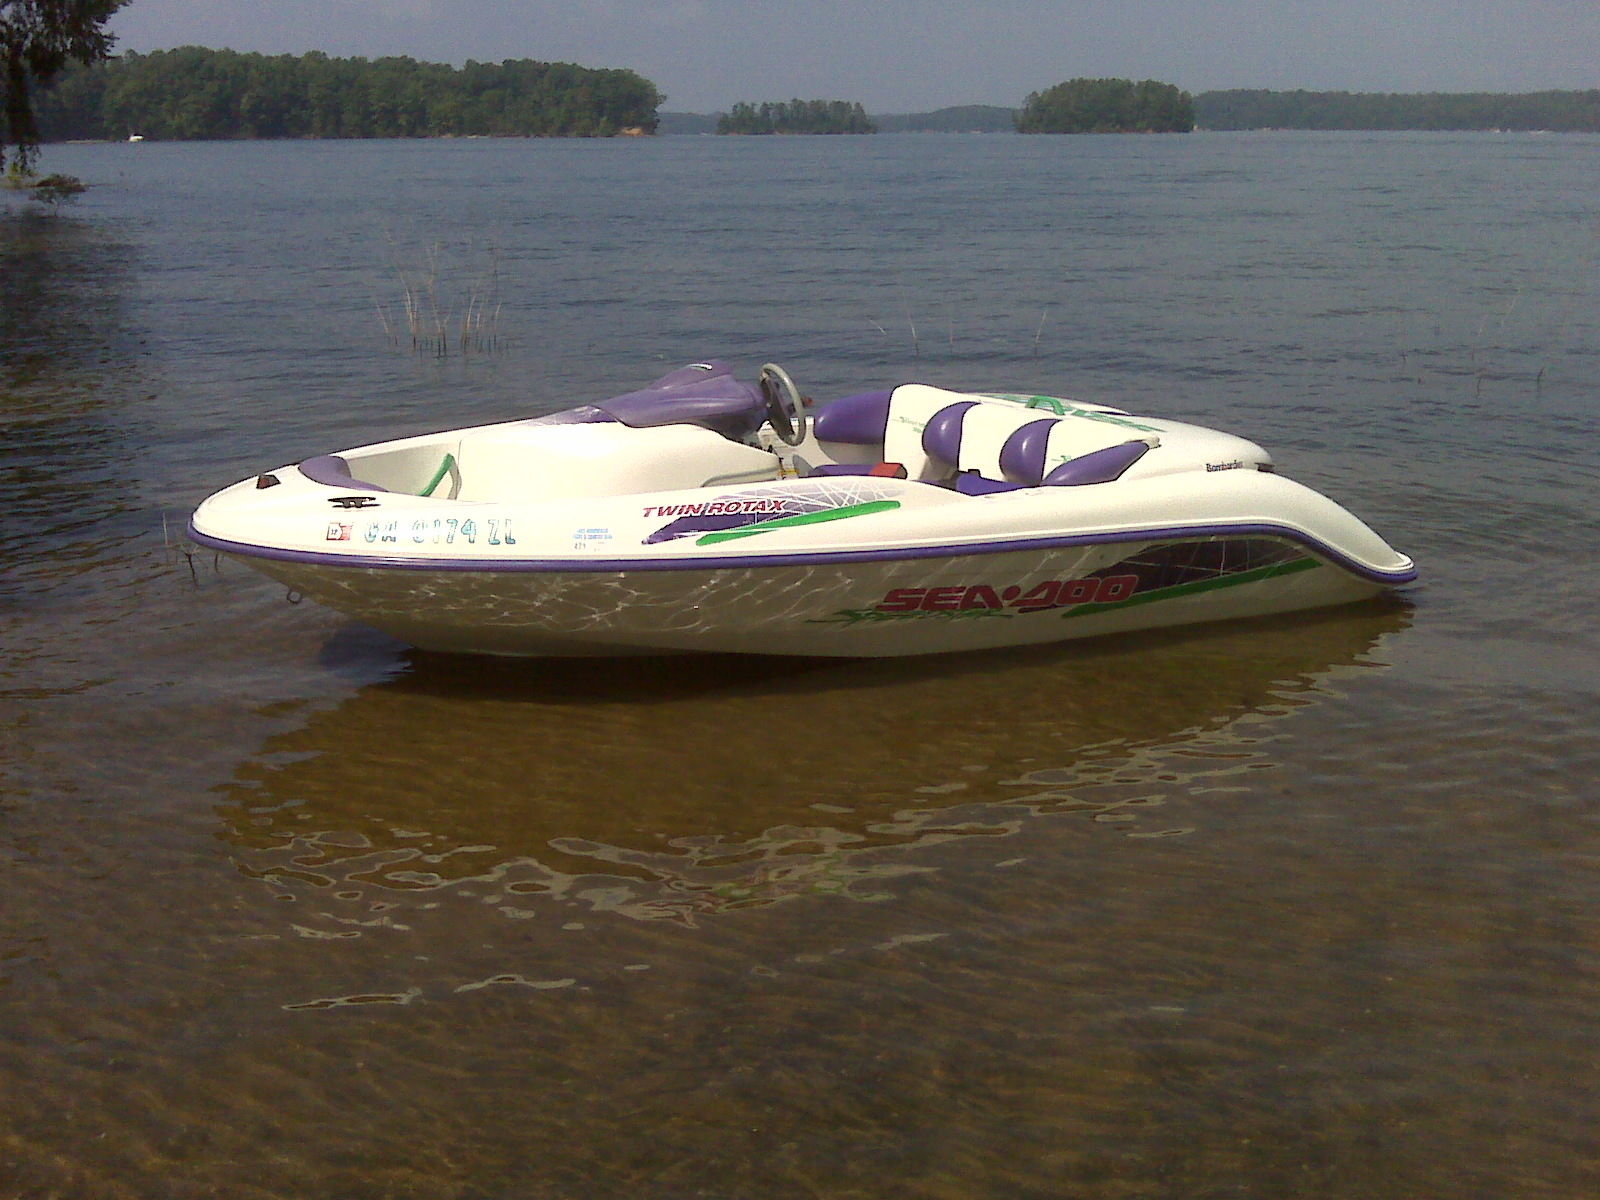 Sea Doo 1995 for sale for $3,000 - Boats-from-USA.com